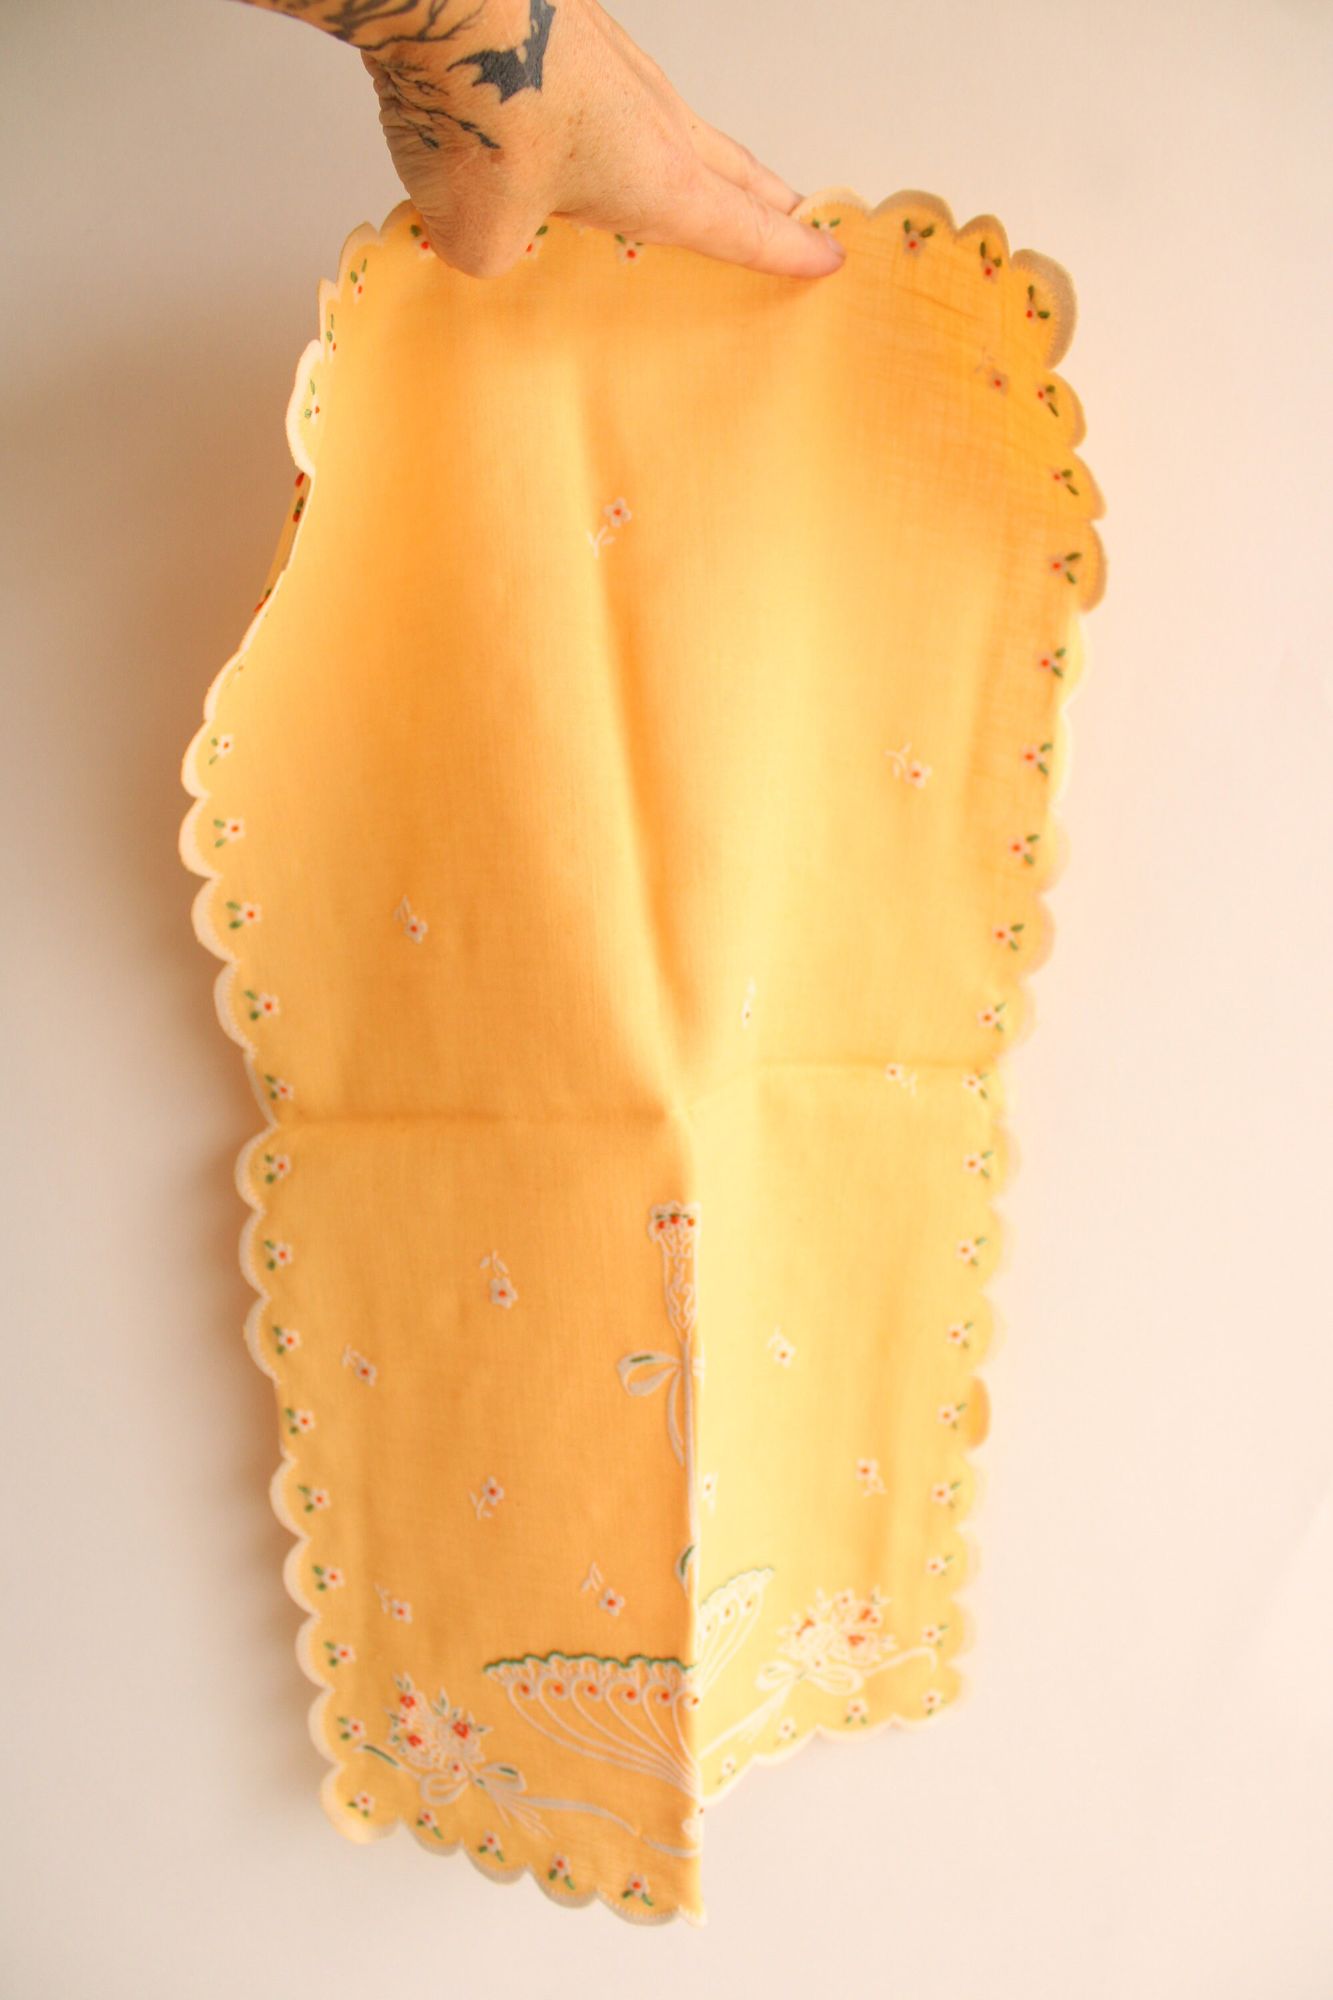 Vintage Yellow with Floral Embroidery Tea Towel